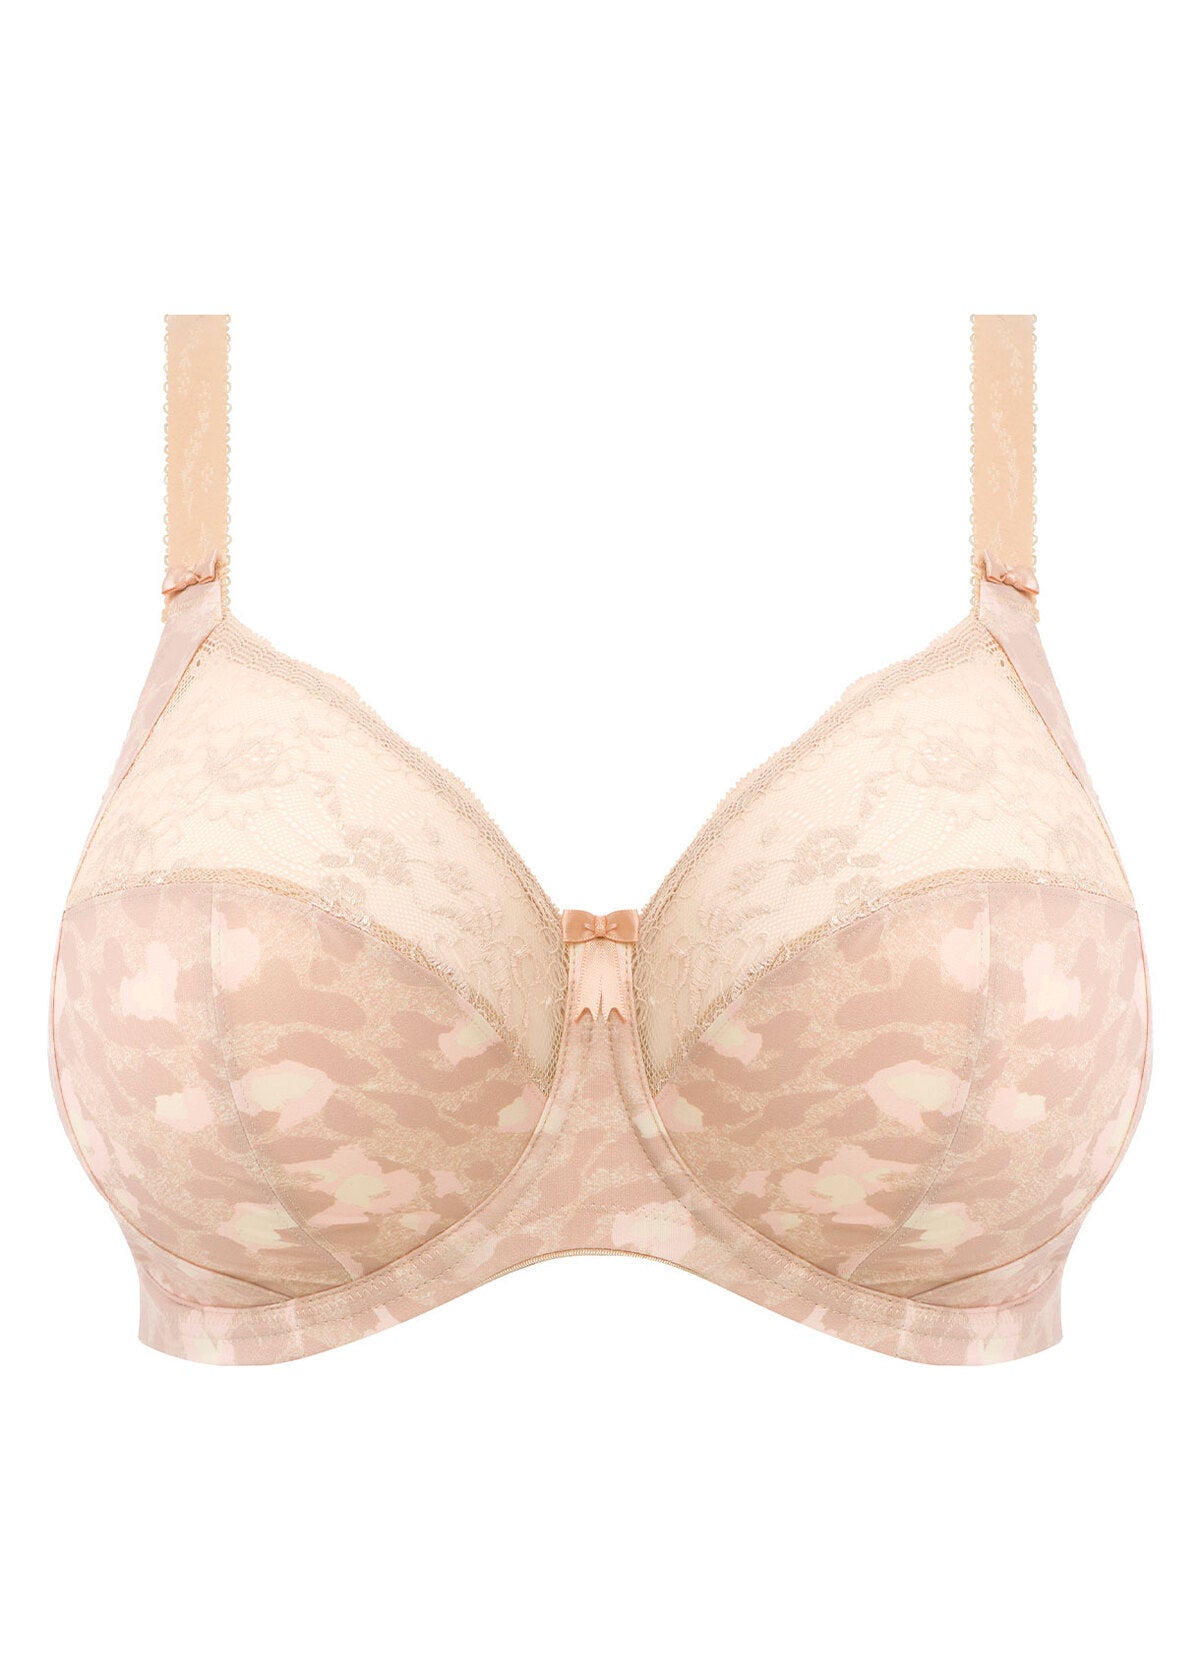 Morgan Stretch Banded Bra - Toasted Almond, front view product image